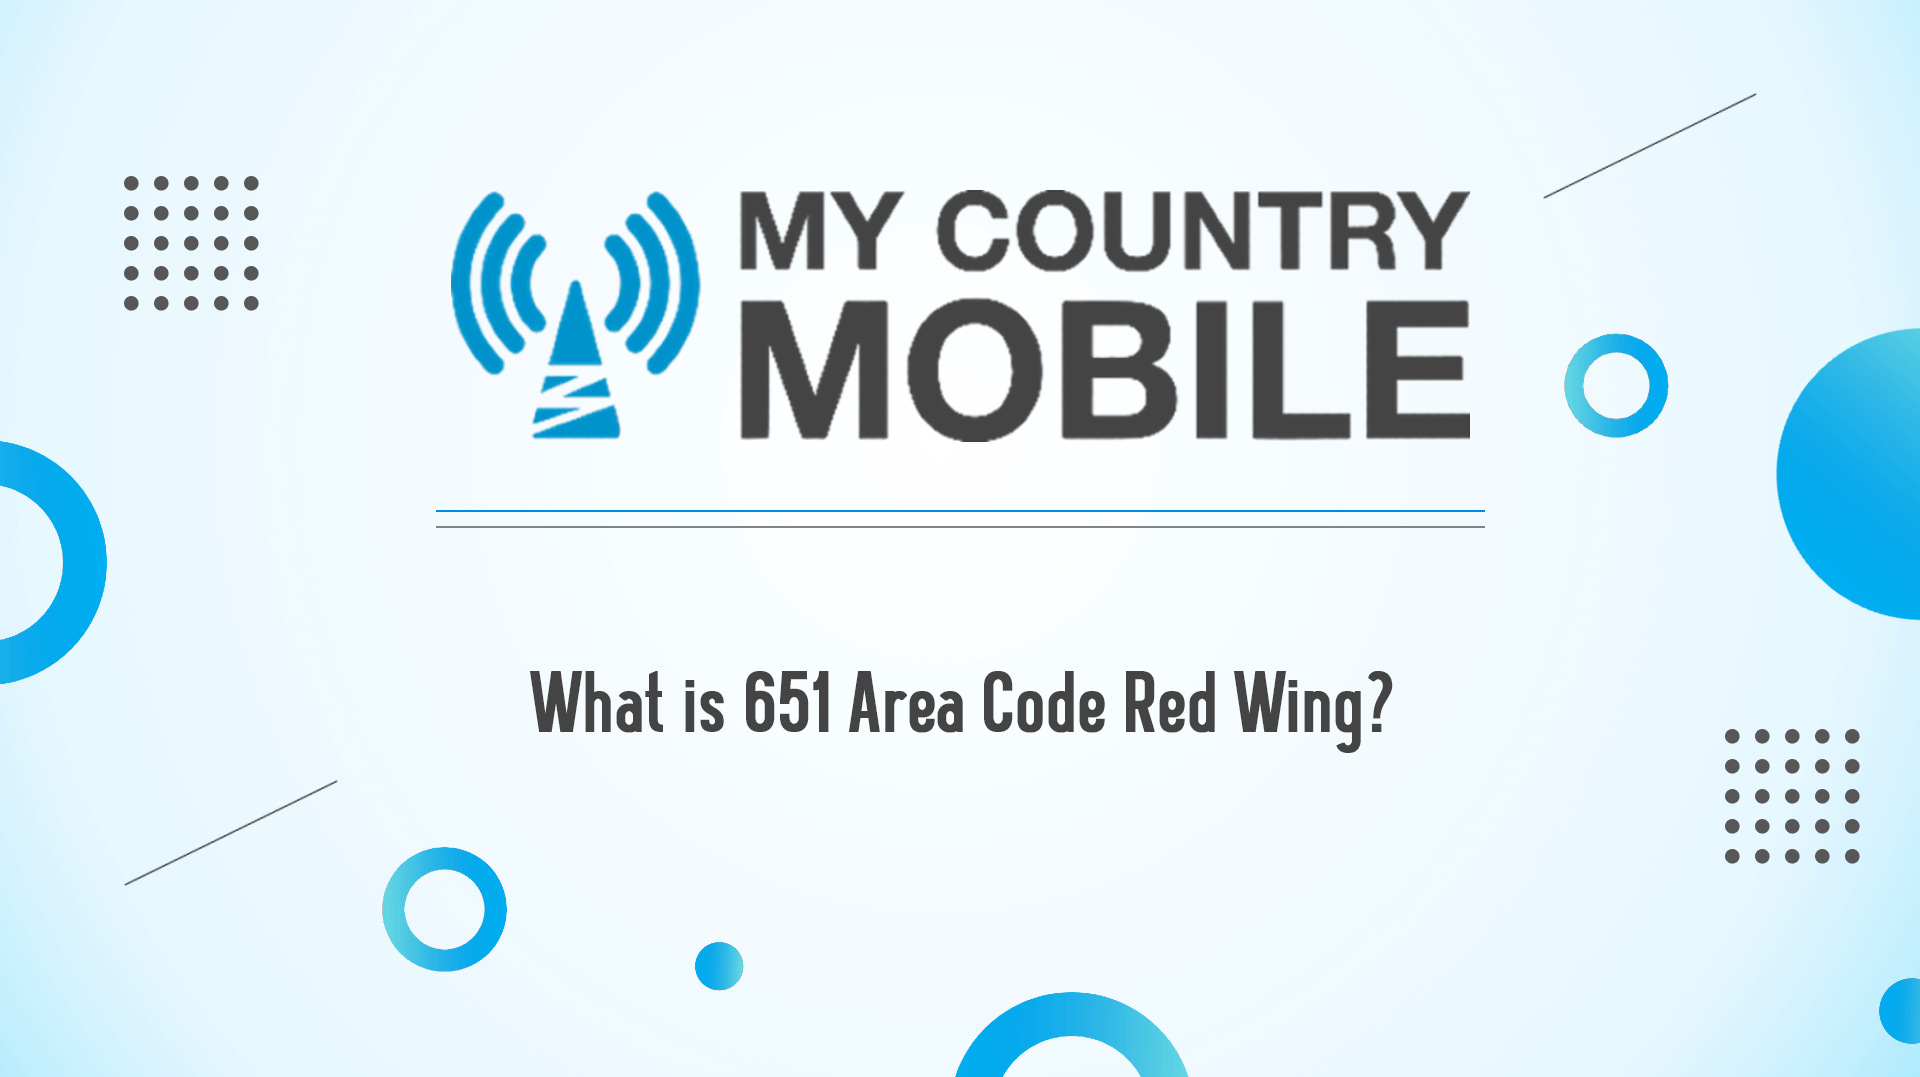 651 Area Code Red Wing